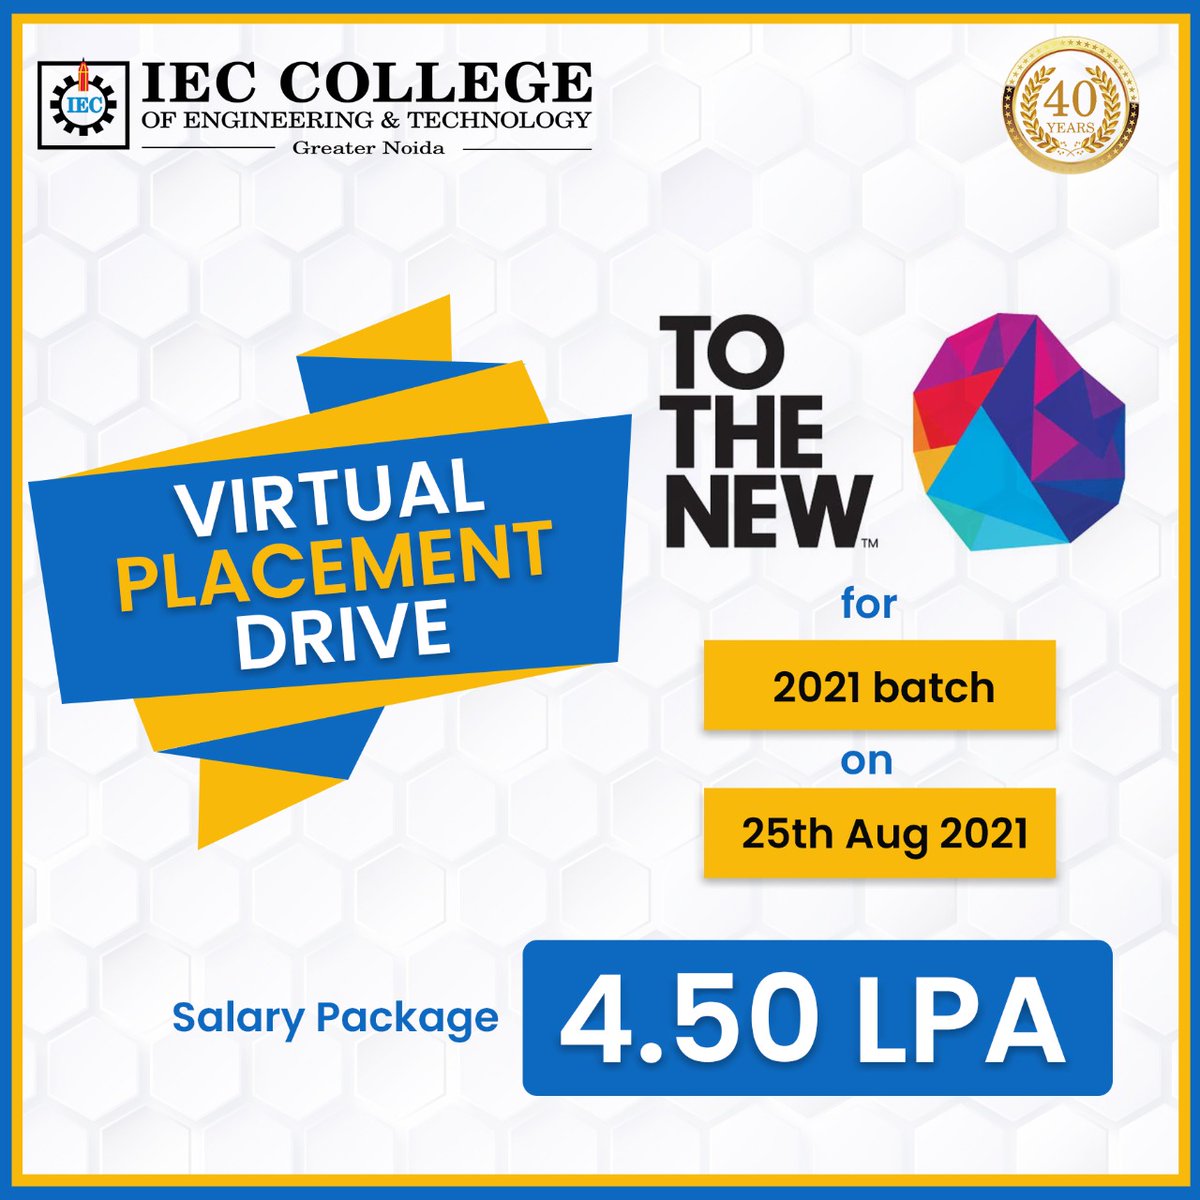 'TO THE NEW'  𝗣𝗹𝗮𝗰𝗲𝗺𝗲𝗻𝘁 𝗗𝗿𝗶𝘃𝗲
'
'
#ieccollegegrnoida #Hiring #ieccollege #Placement #bpharma #pharmacy #admission #admissionsoprn #pharmaceutical #VirtualPlacementDrive #VirtualDrive #job #IECCOLLEG #CampusPlacement #PlacementDrive #Success #placement2021